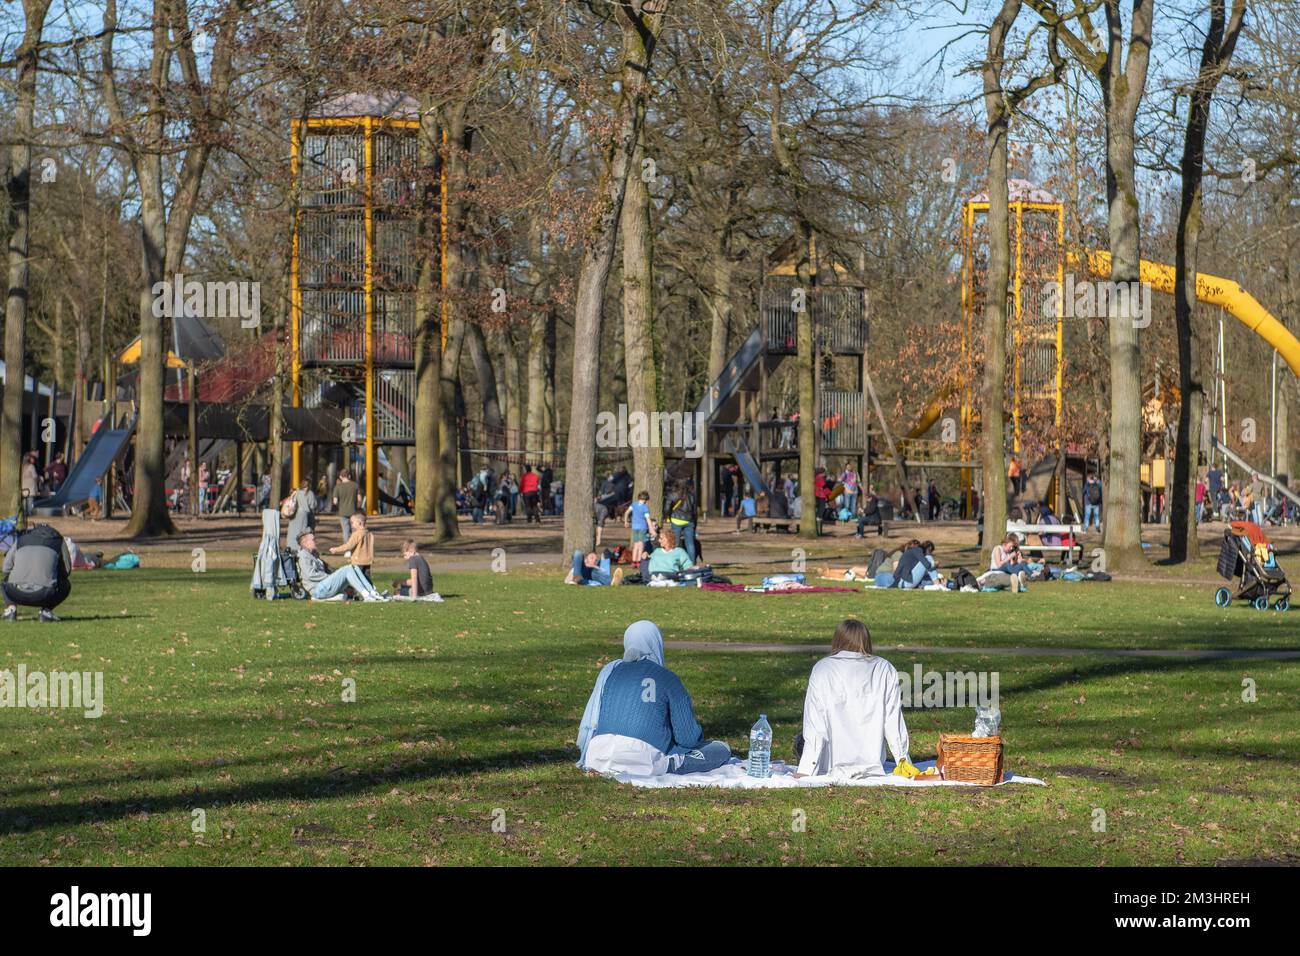 Hasselt, Limburg - Belgium - 22.02.2021 Children and parents rest together. Playground with children's attractions in the forest park. Stock Photo